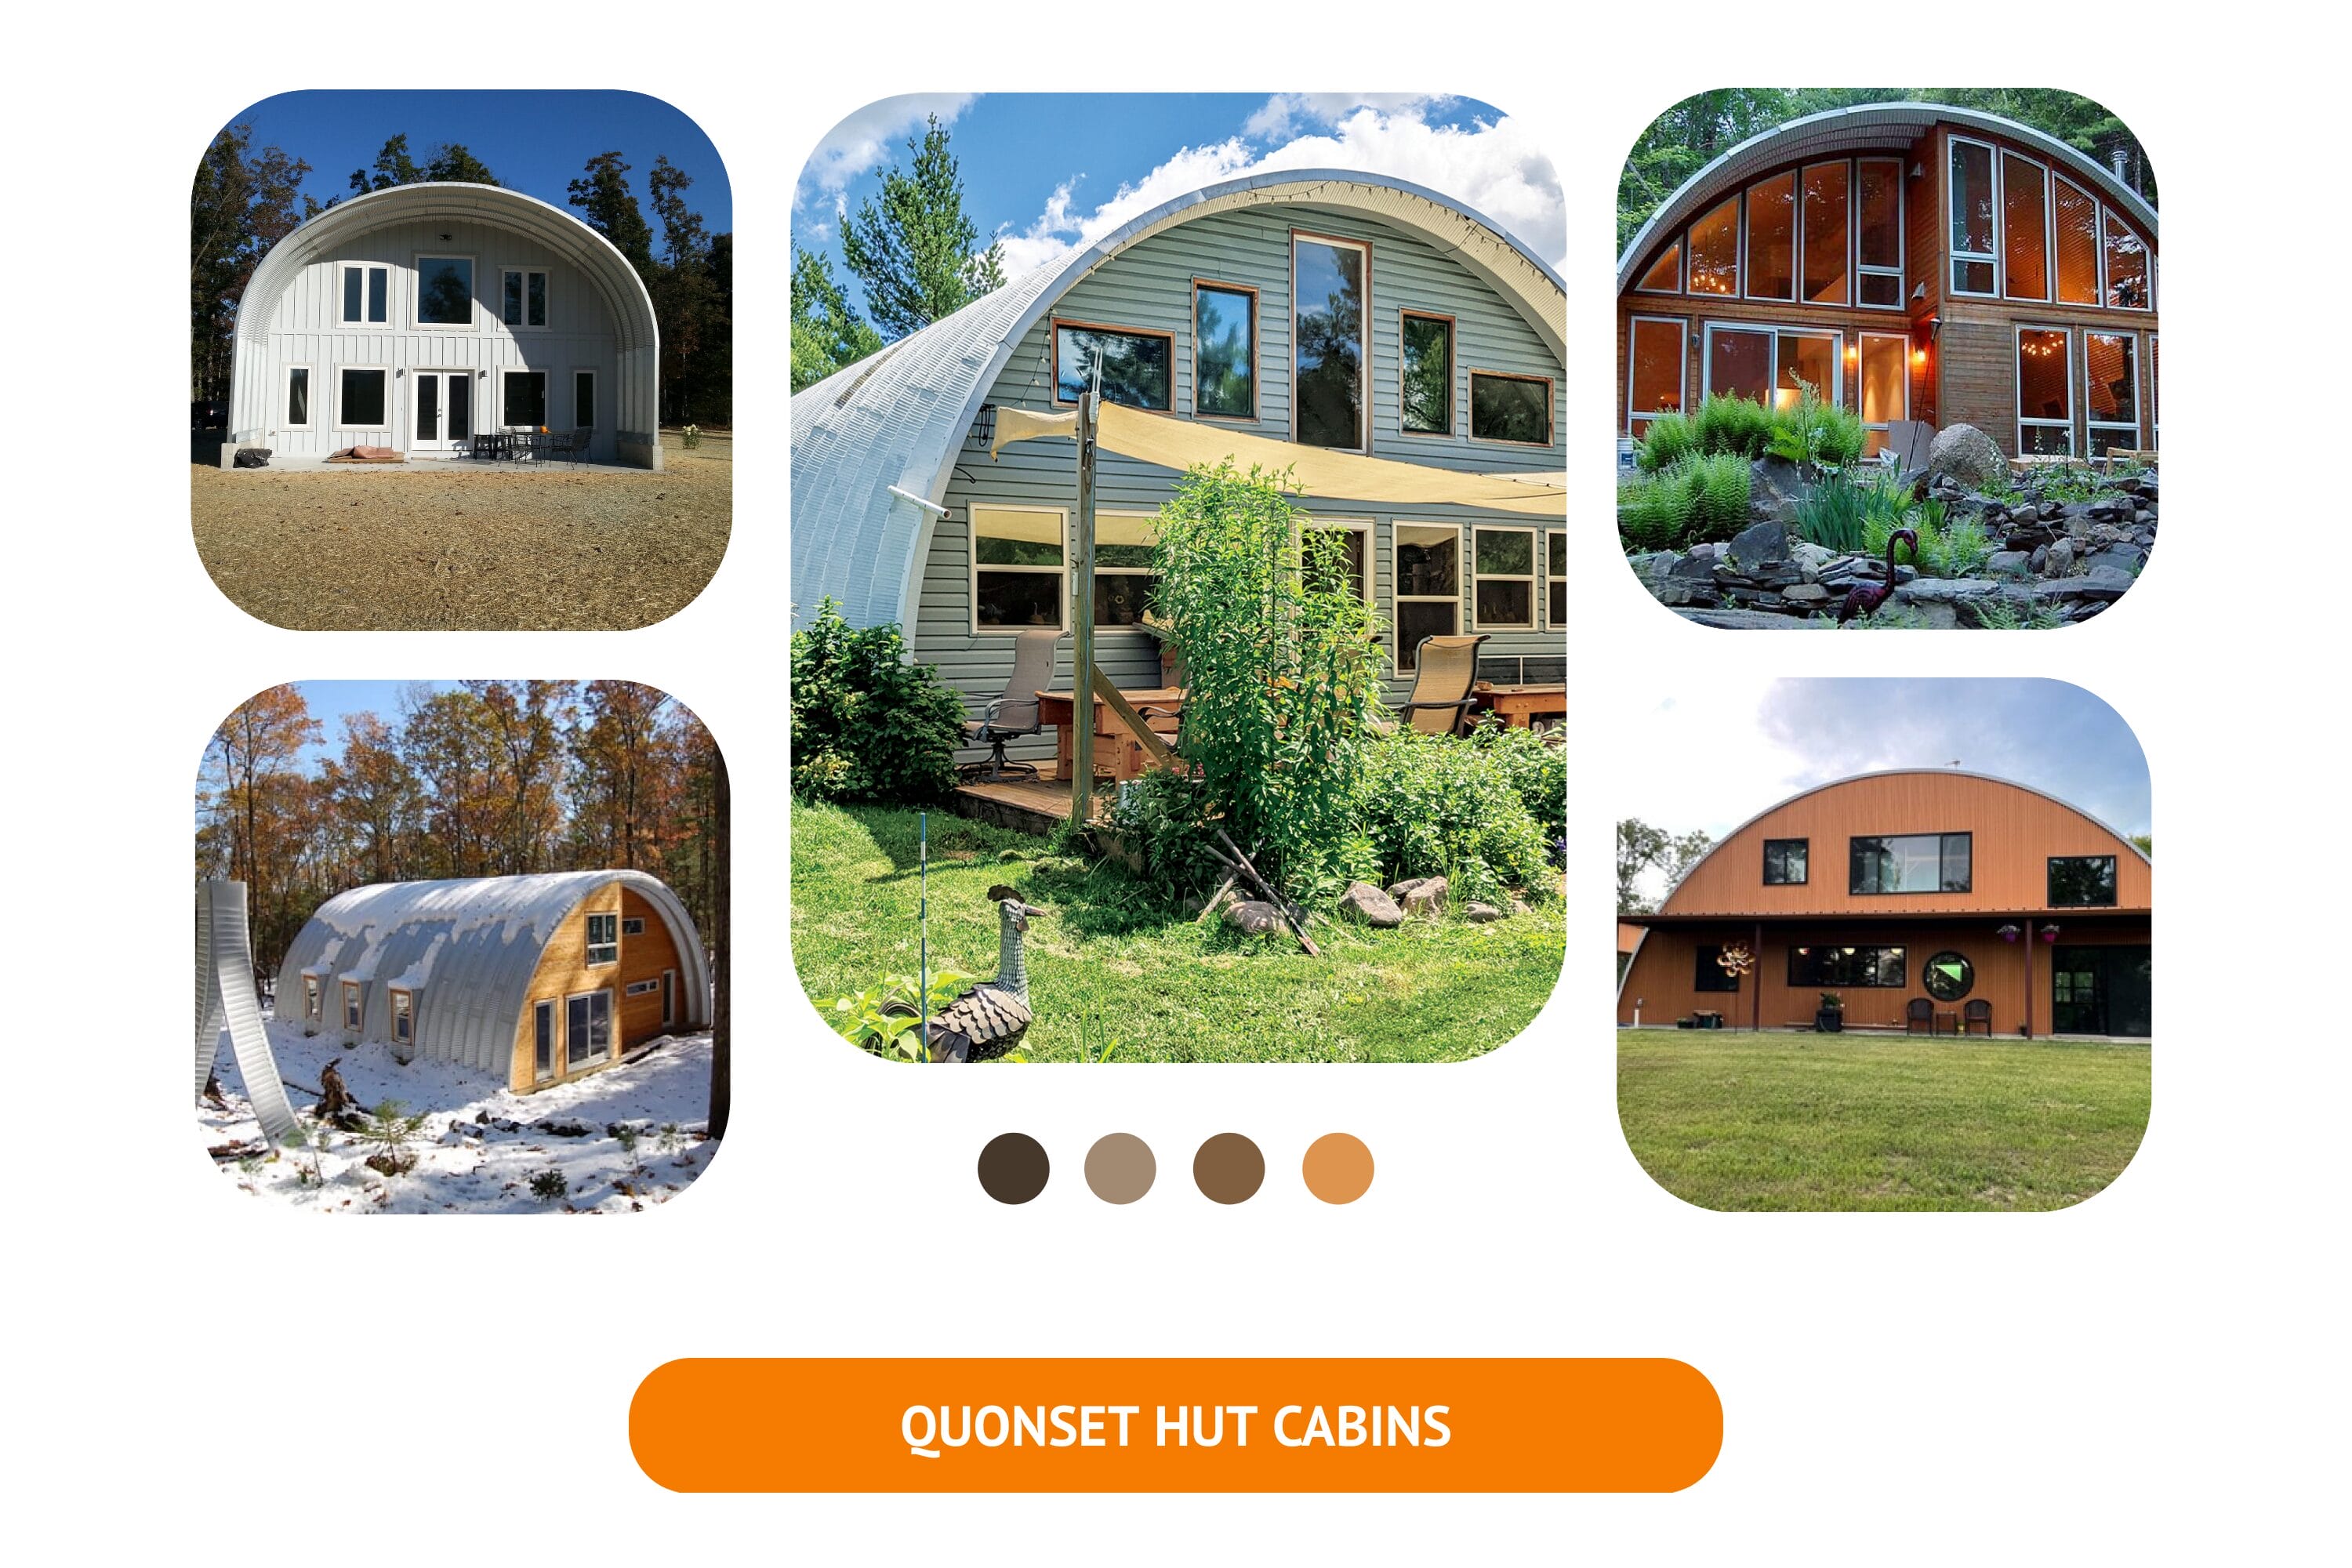 Are you looking for a quonset hut cabin like this?